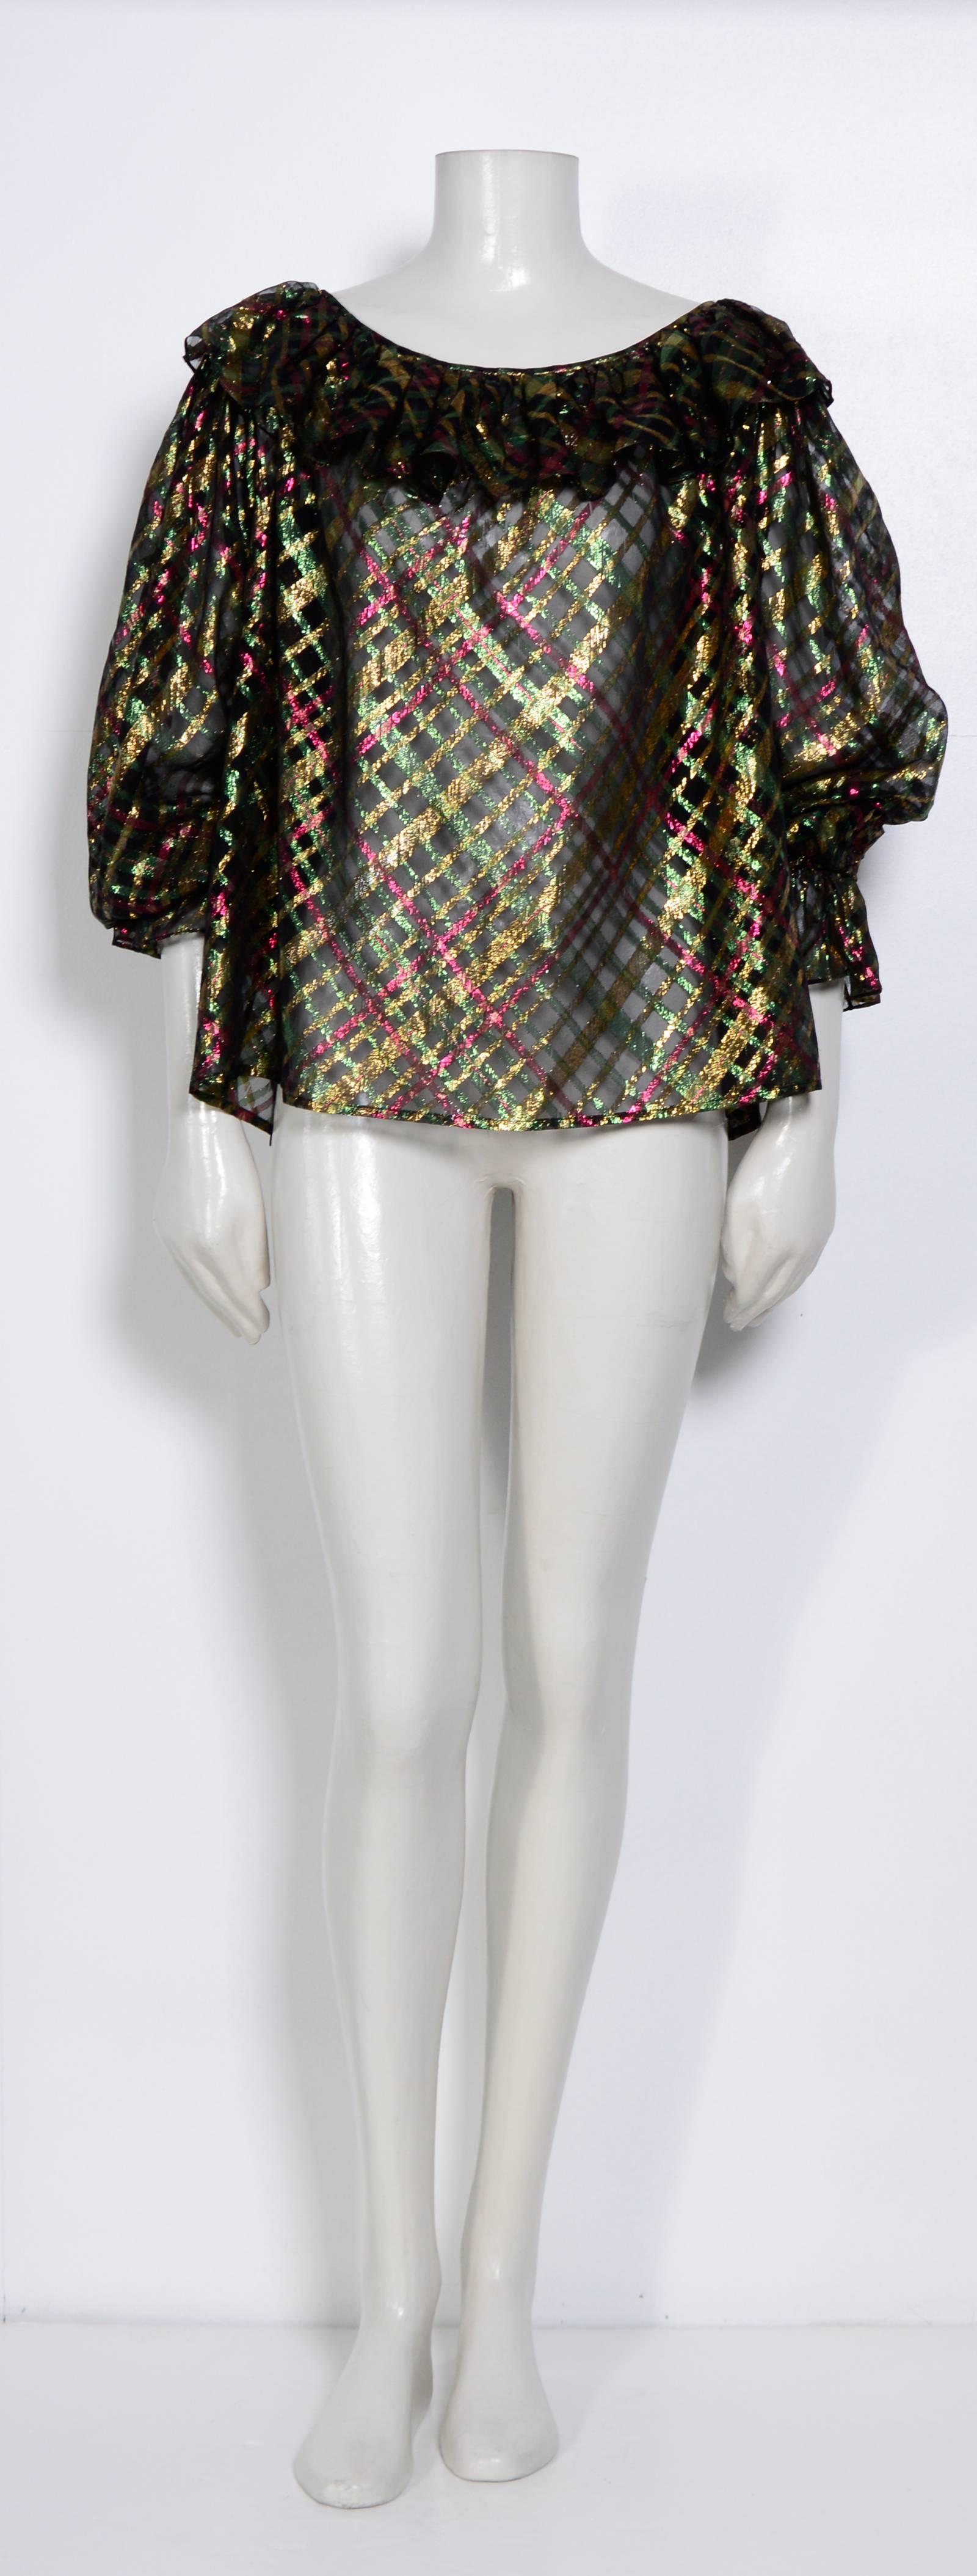 Stunning Yves Saint Laurent Silk Blouse. 
In excellent condition
French Size 42